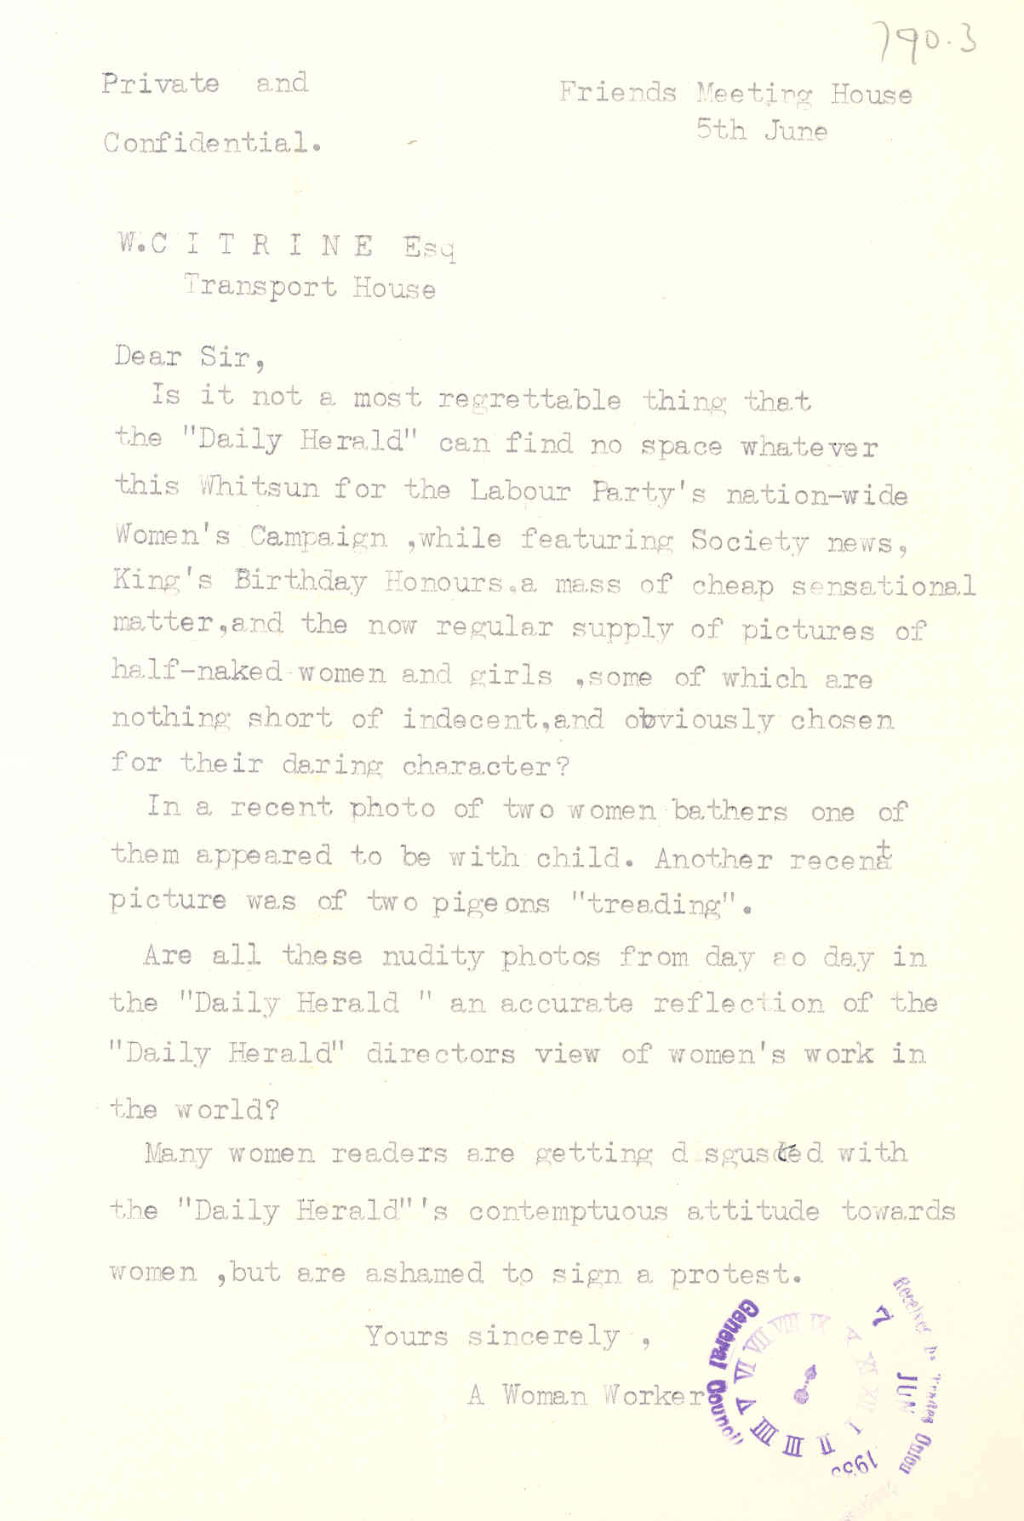 Letter about the representation of women in the 'Daily Herald', 1933